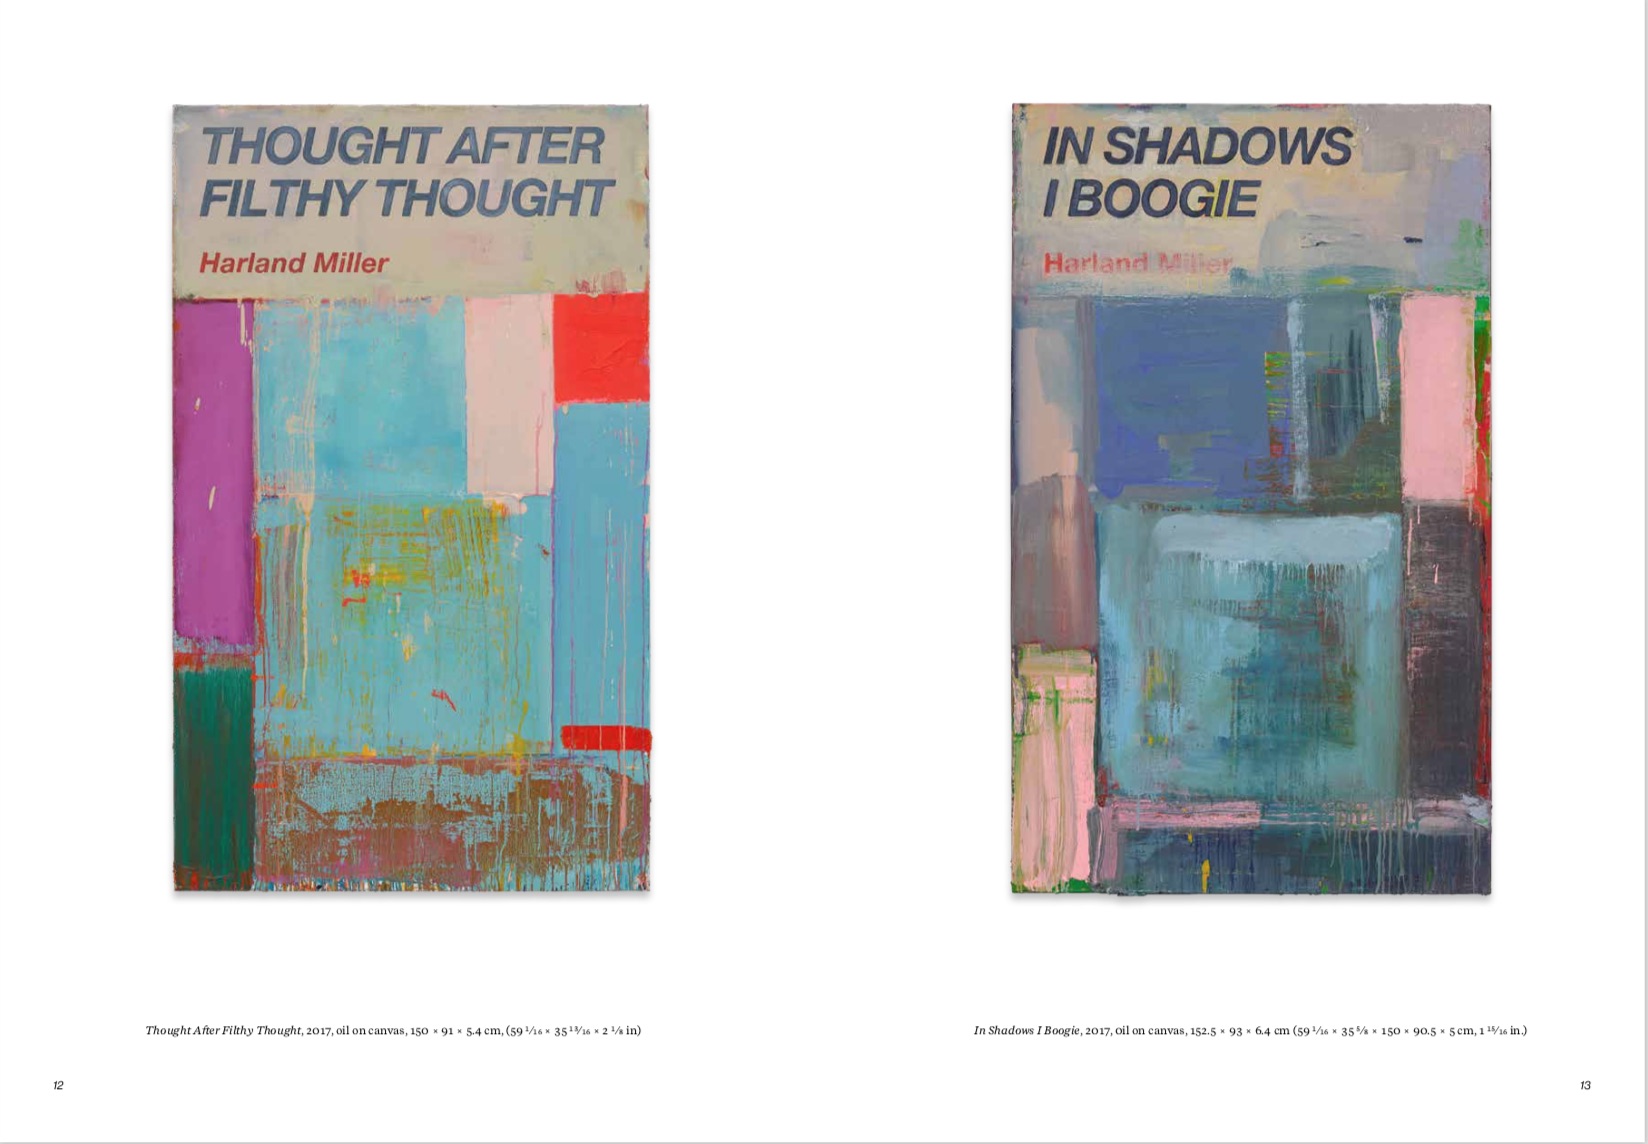 By Michael Bracewell, Martin Herbert, Catherine Ince from Harland Miller: In Shadows I Boogie copyright Phaidon 2019